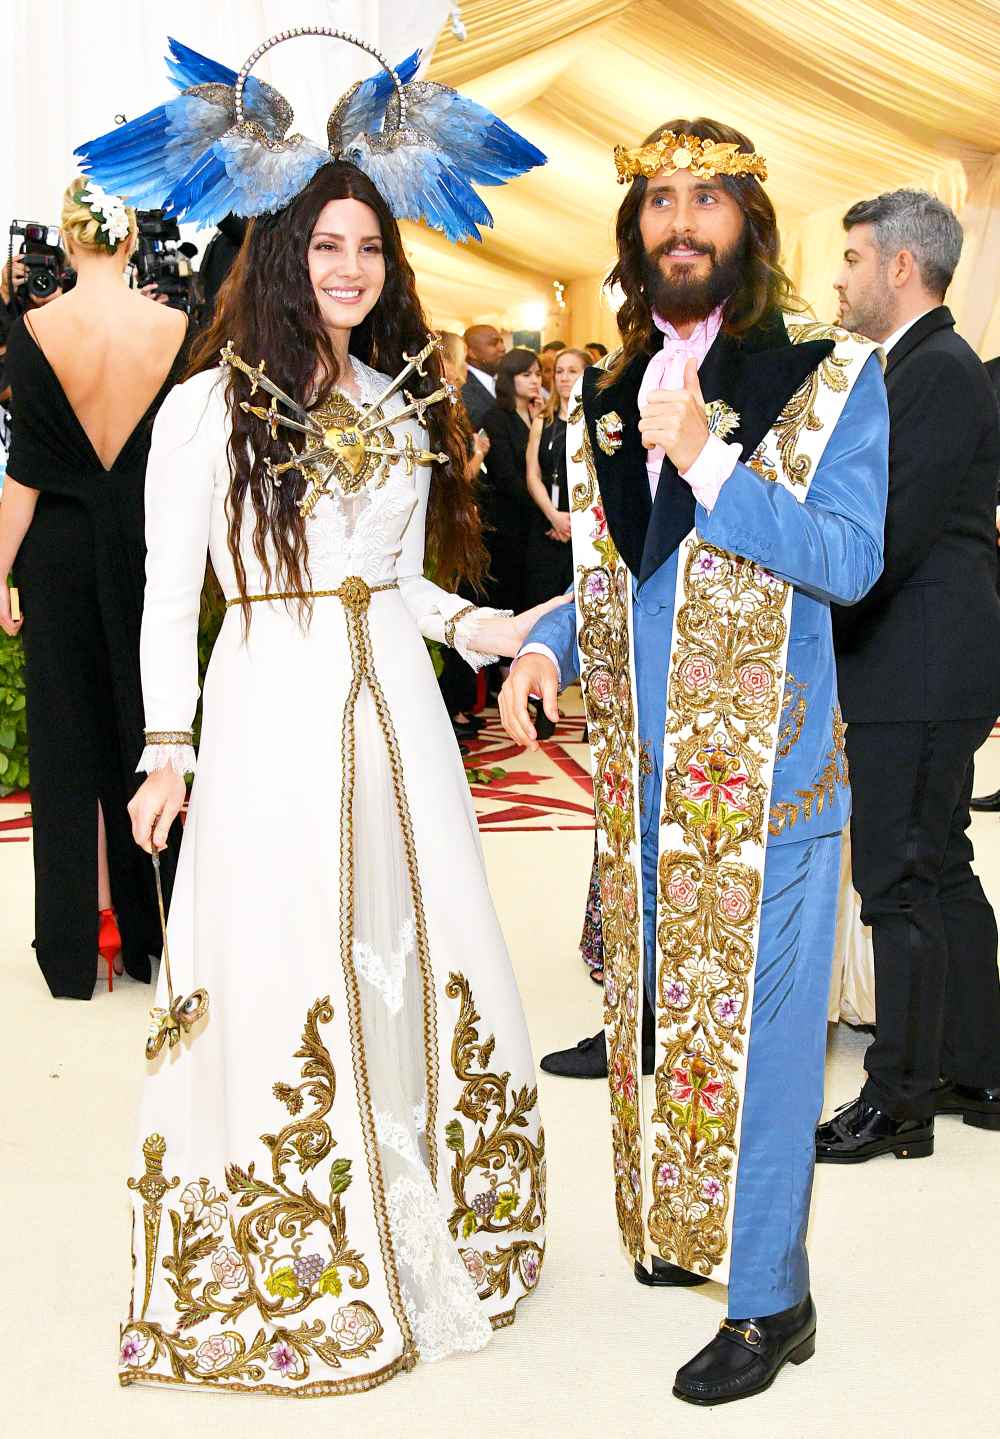 Lana Del Rey and Jared Leto attend the Heavenly Bodies: Fashion & The Catholic Imagination Costume Institute Gala at The Metropolitan Museum of Art on May 7, 2018 in New York City.